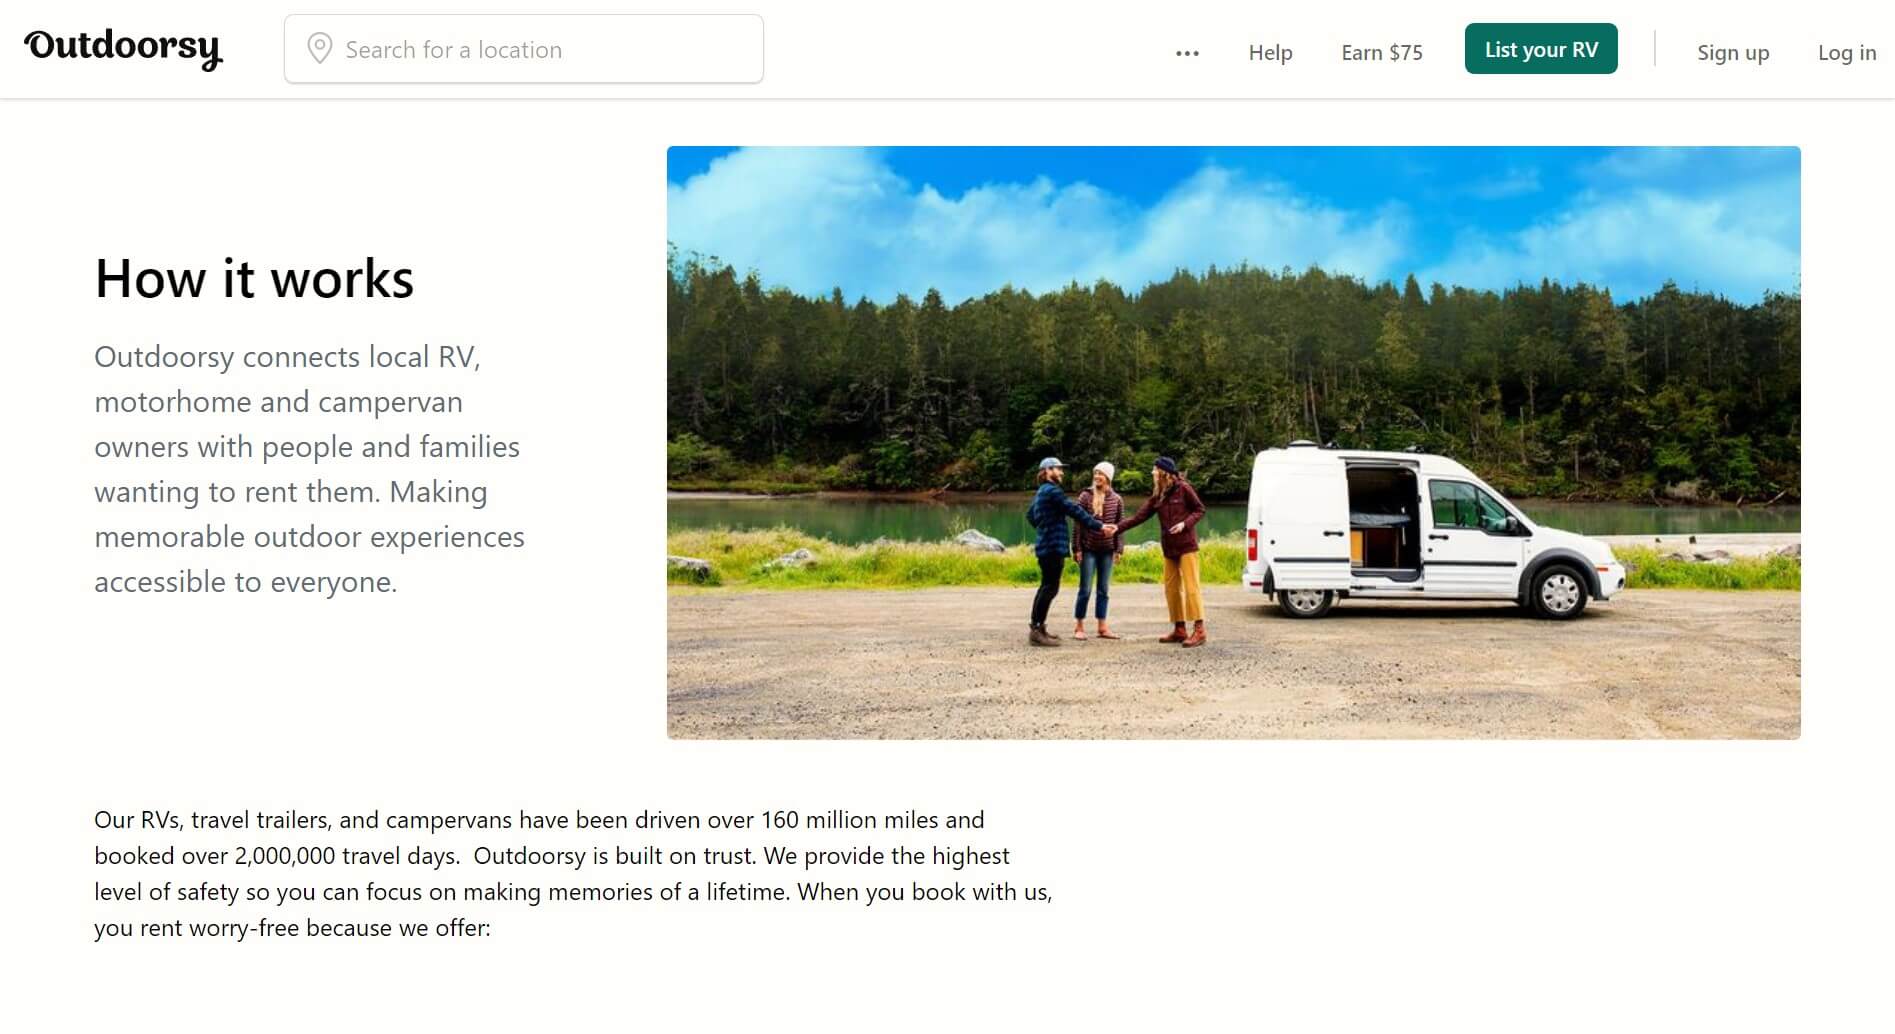 About page explaining Outdoorsy's RV rental system